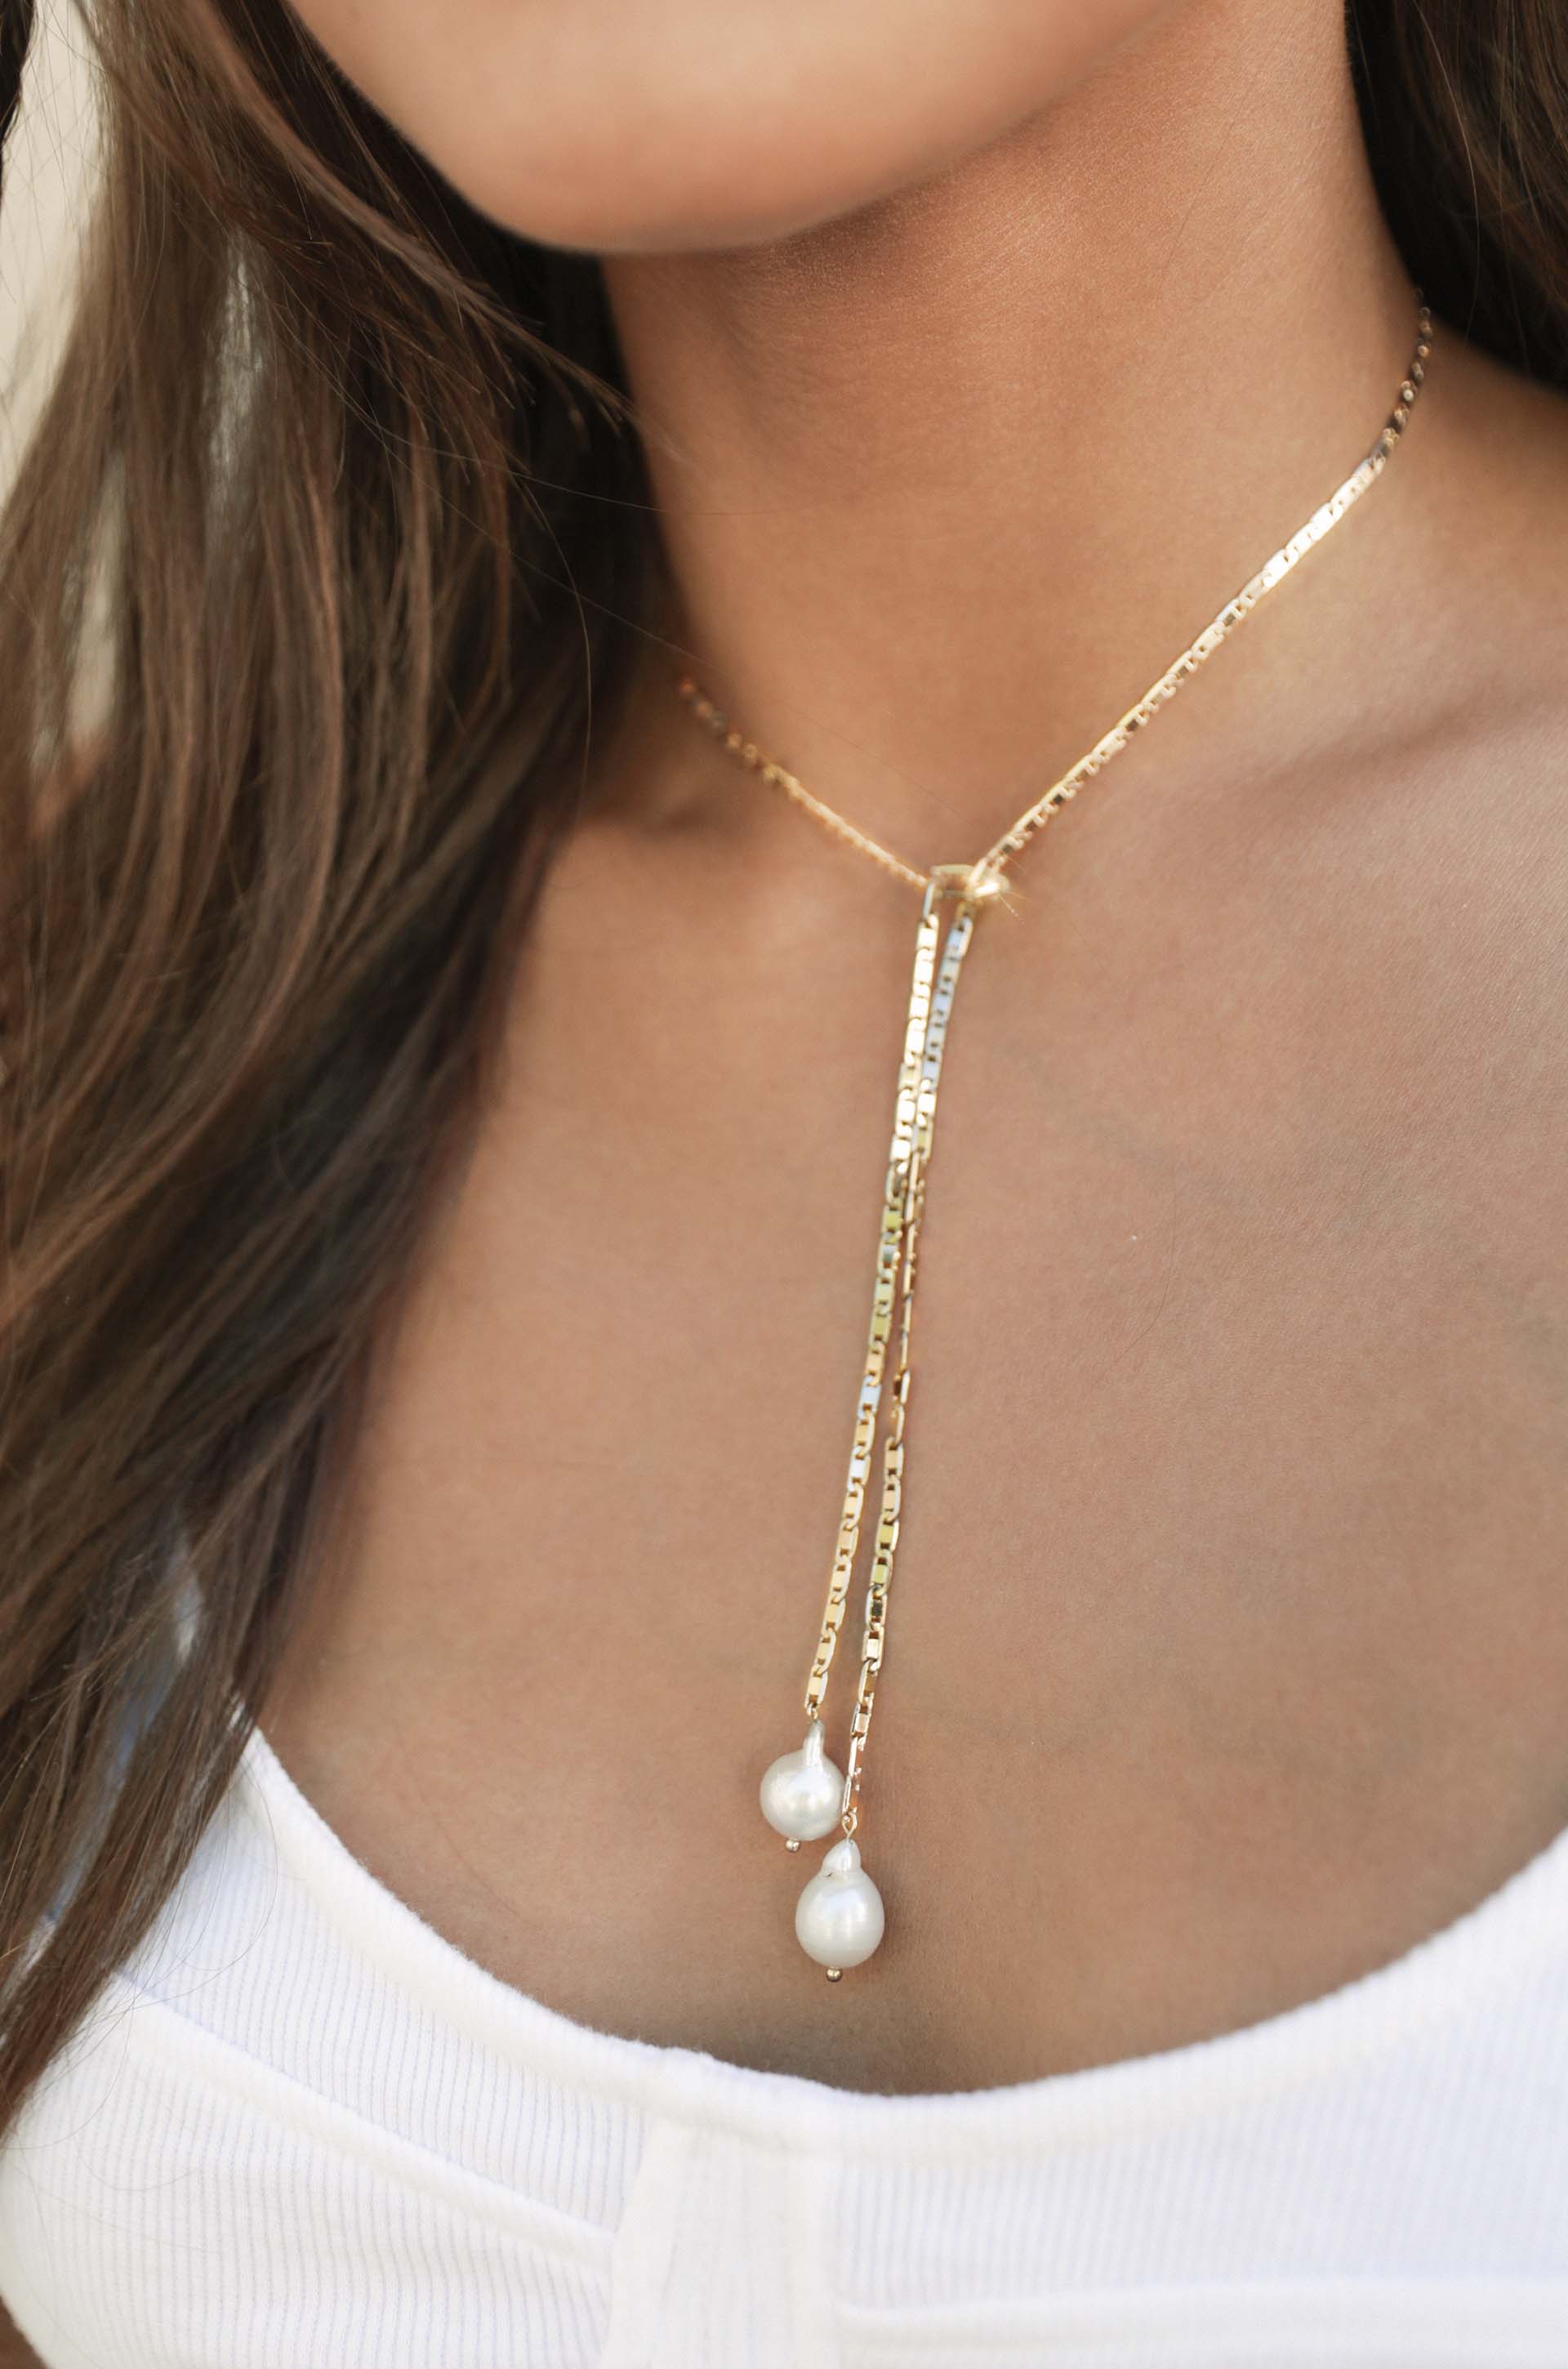 Minimalist 18k Gold Plated Chain and Freshwater Pearl Bolo Lariat Necklace on model